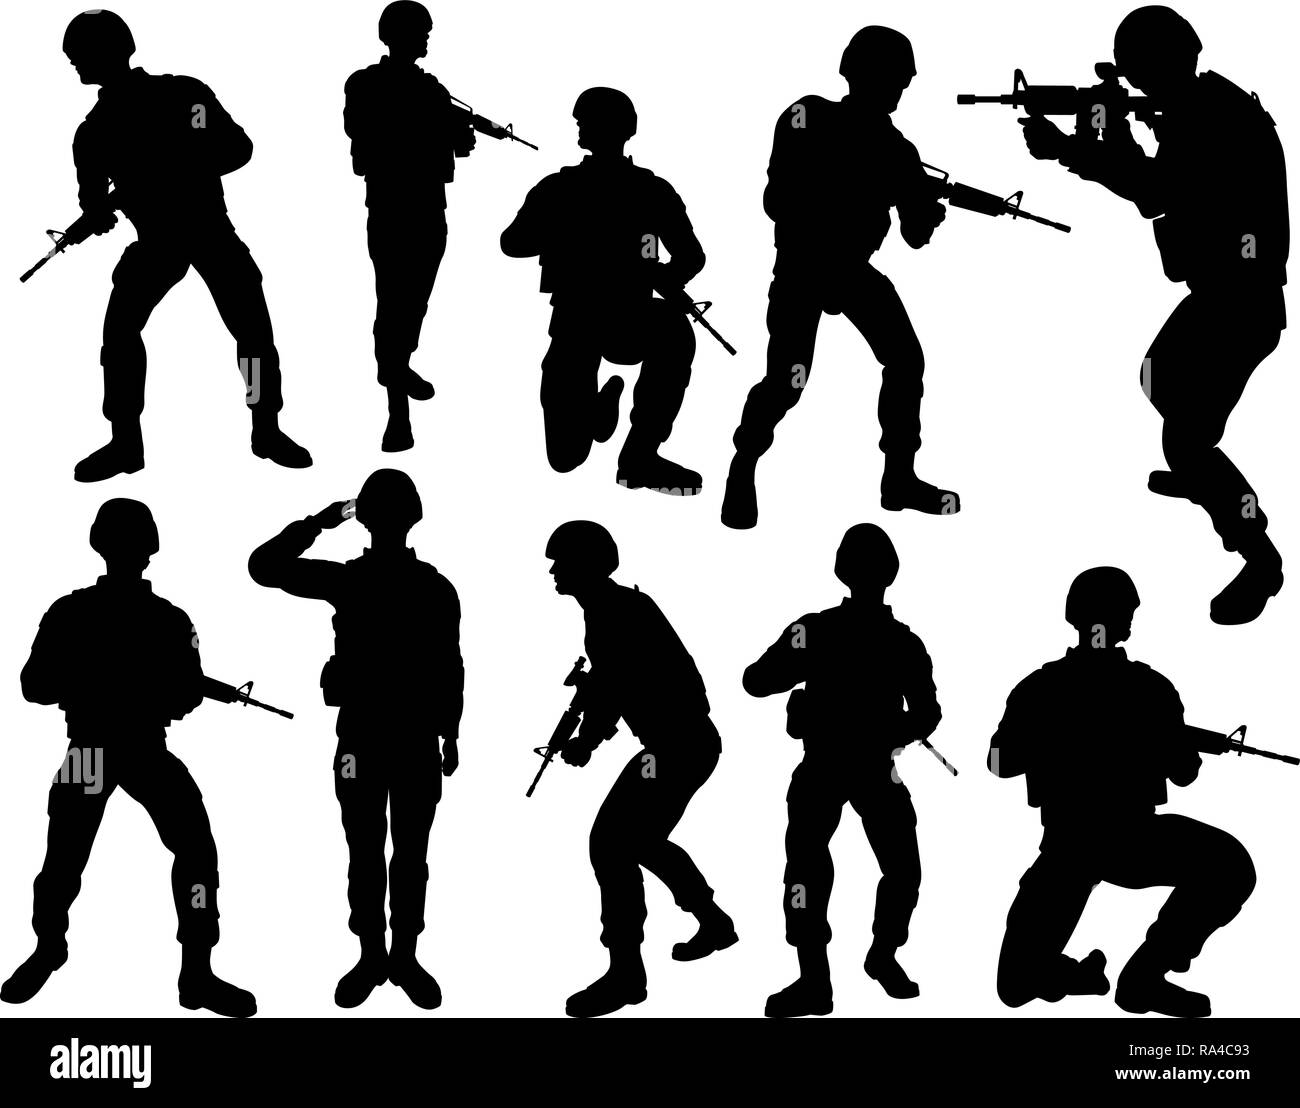 Soldier silhouettes Black and White Stock Photos & Images - Alamy